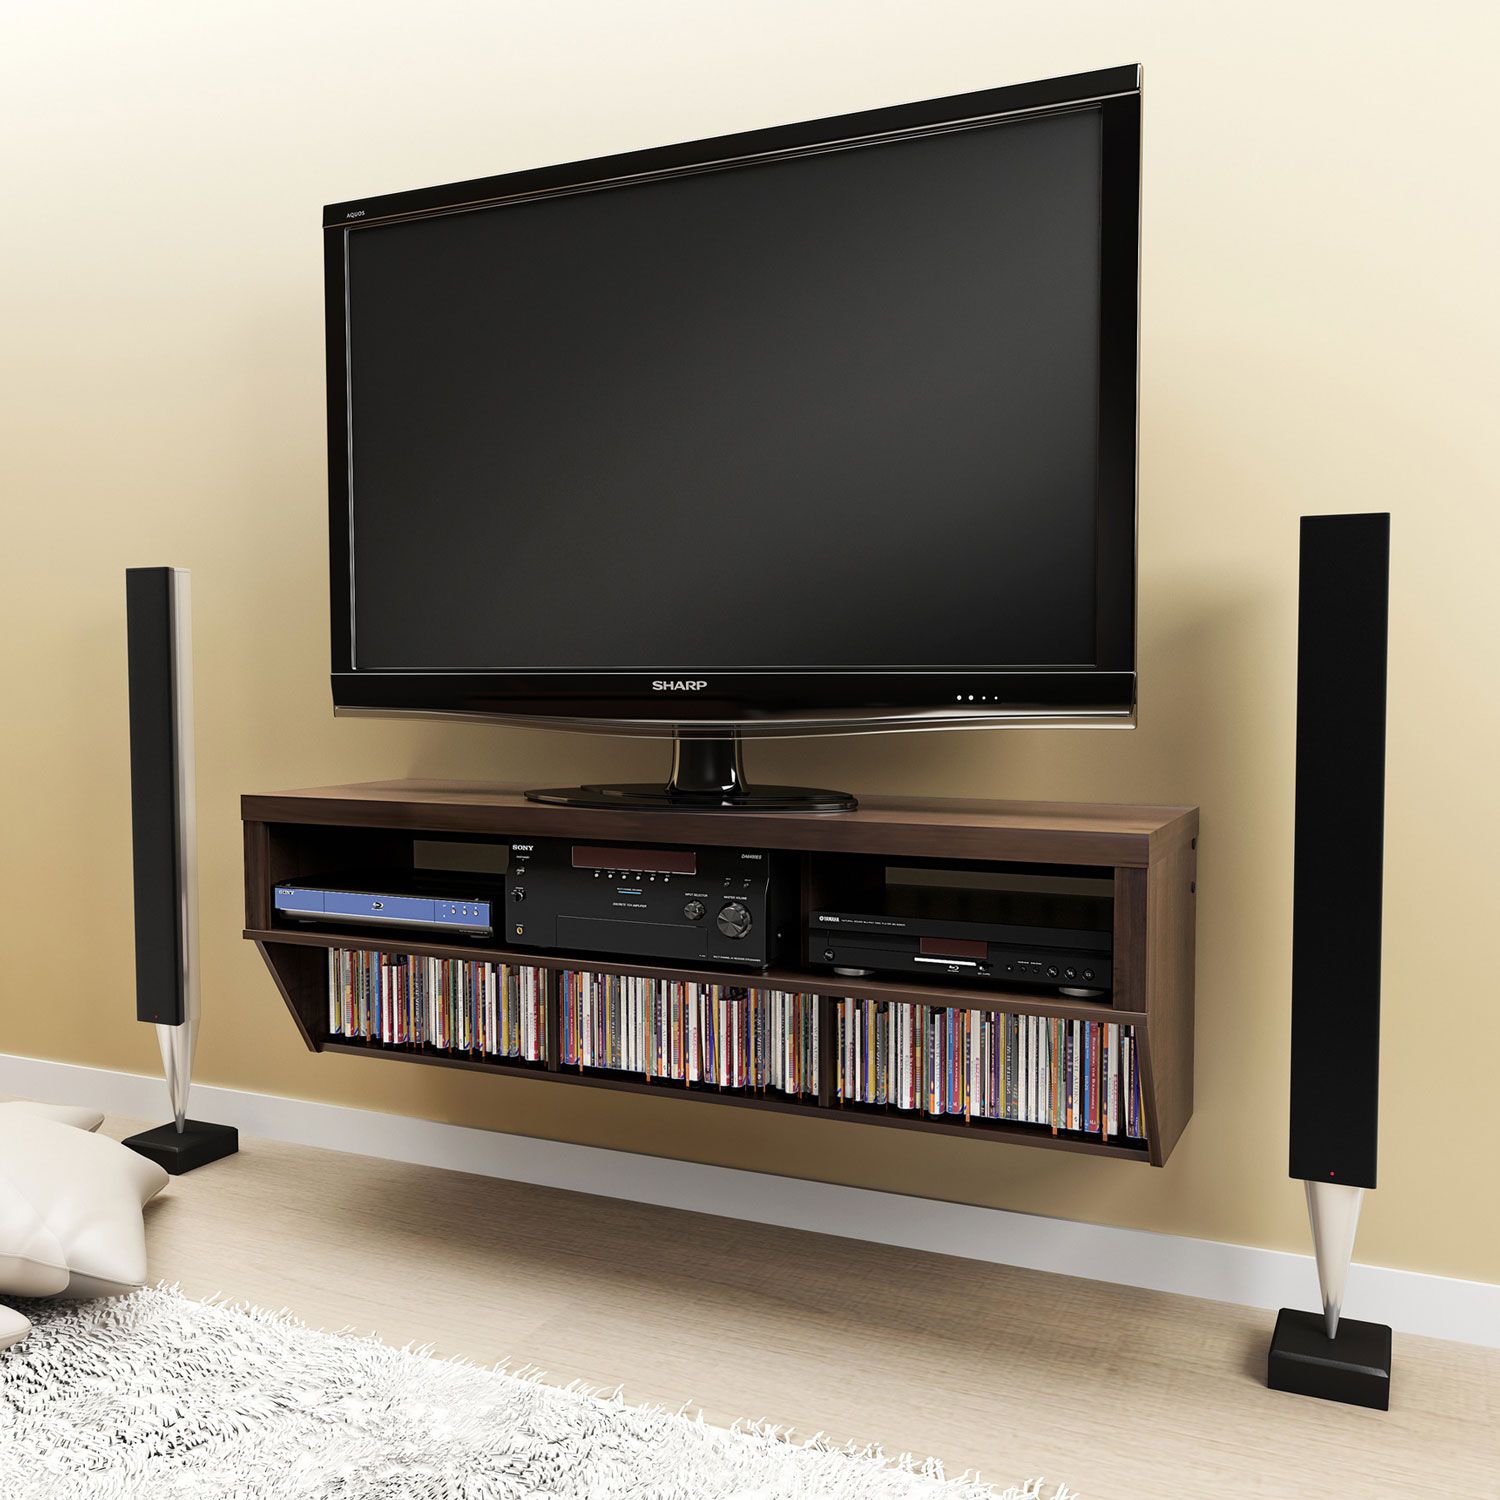 Cool Flat Screen Tv Stands With Mount | Homesfeed Pertaining To Stand For Flat Screen (View 19 of 20)